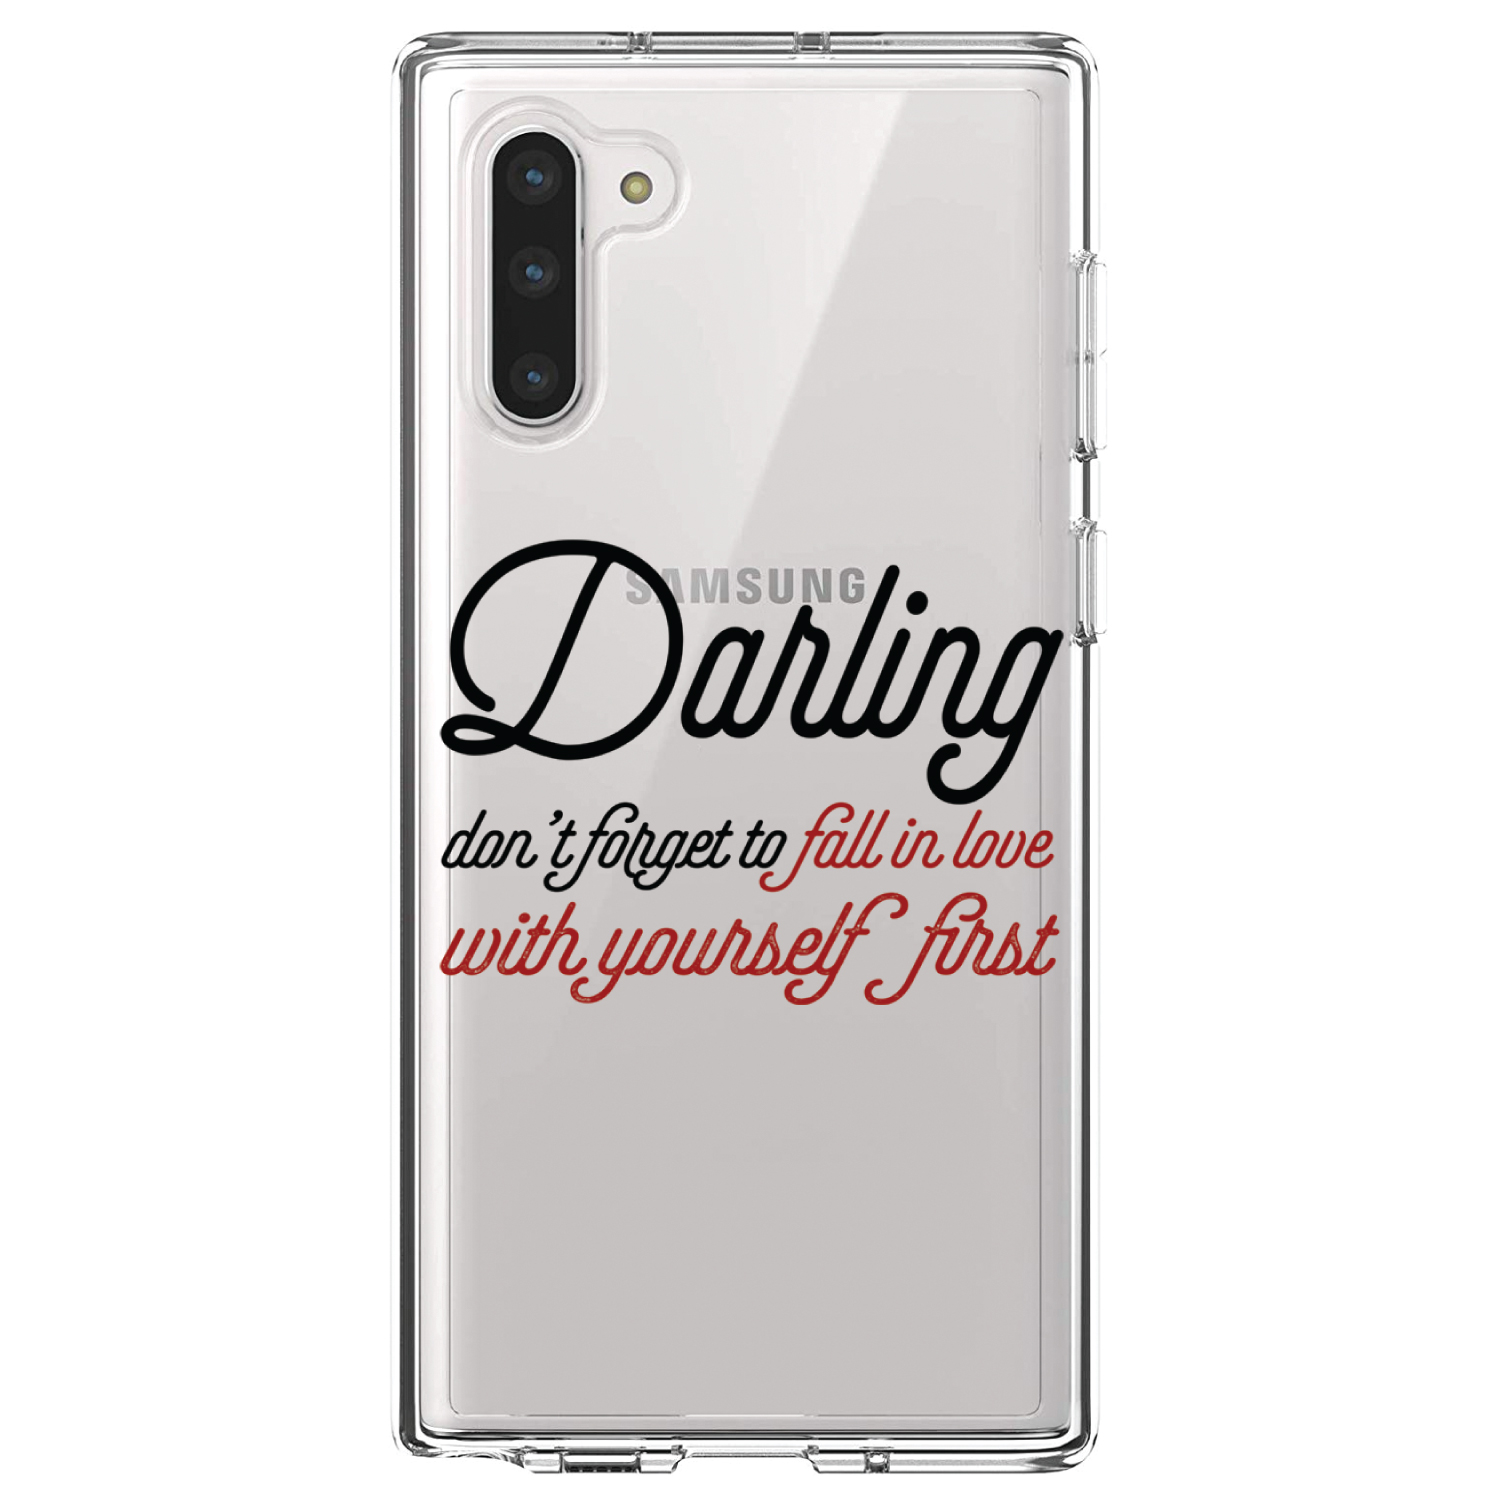 DistinctInk Clear Shockproof Hybrid Case for Samsung Galaxy Note 10 (6.3" Screen) - TPU Bumper Acrylic Back Tempered Glass Screen Protector - Darling Don't Forget to Fall In Love with Yourself - image 1 of 1